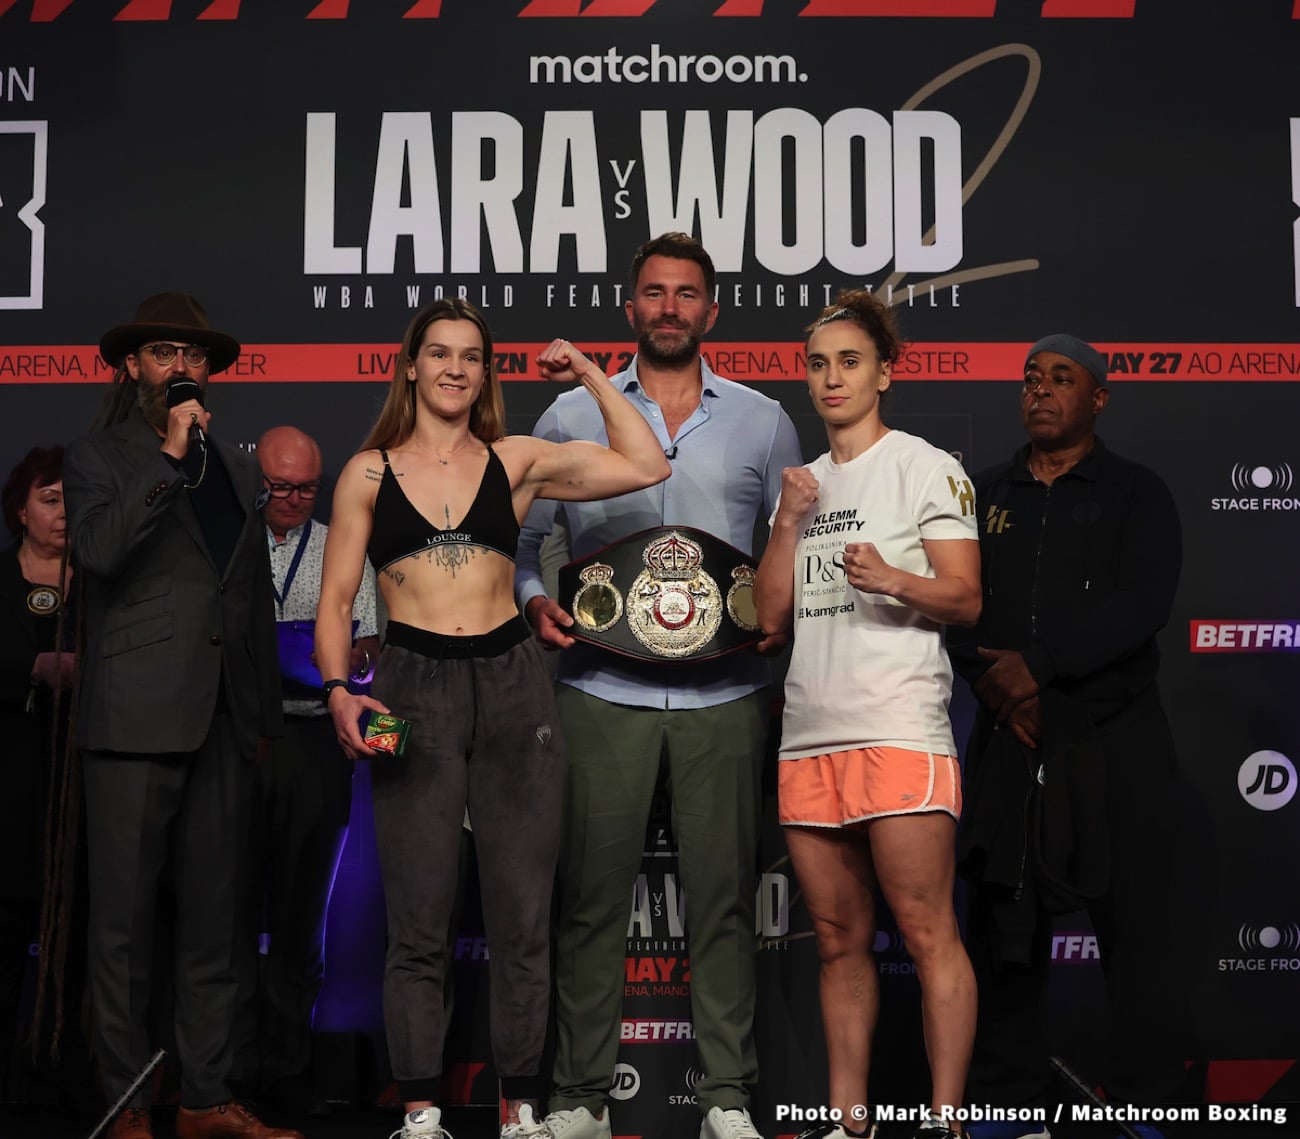 Image: Mauricio Lara stripped of WBA title, only Leigh Wood can win - weigh-in results